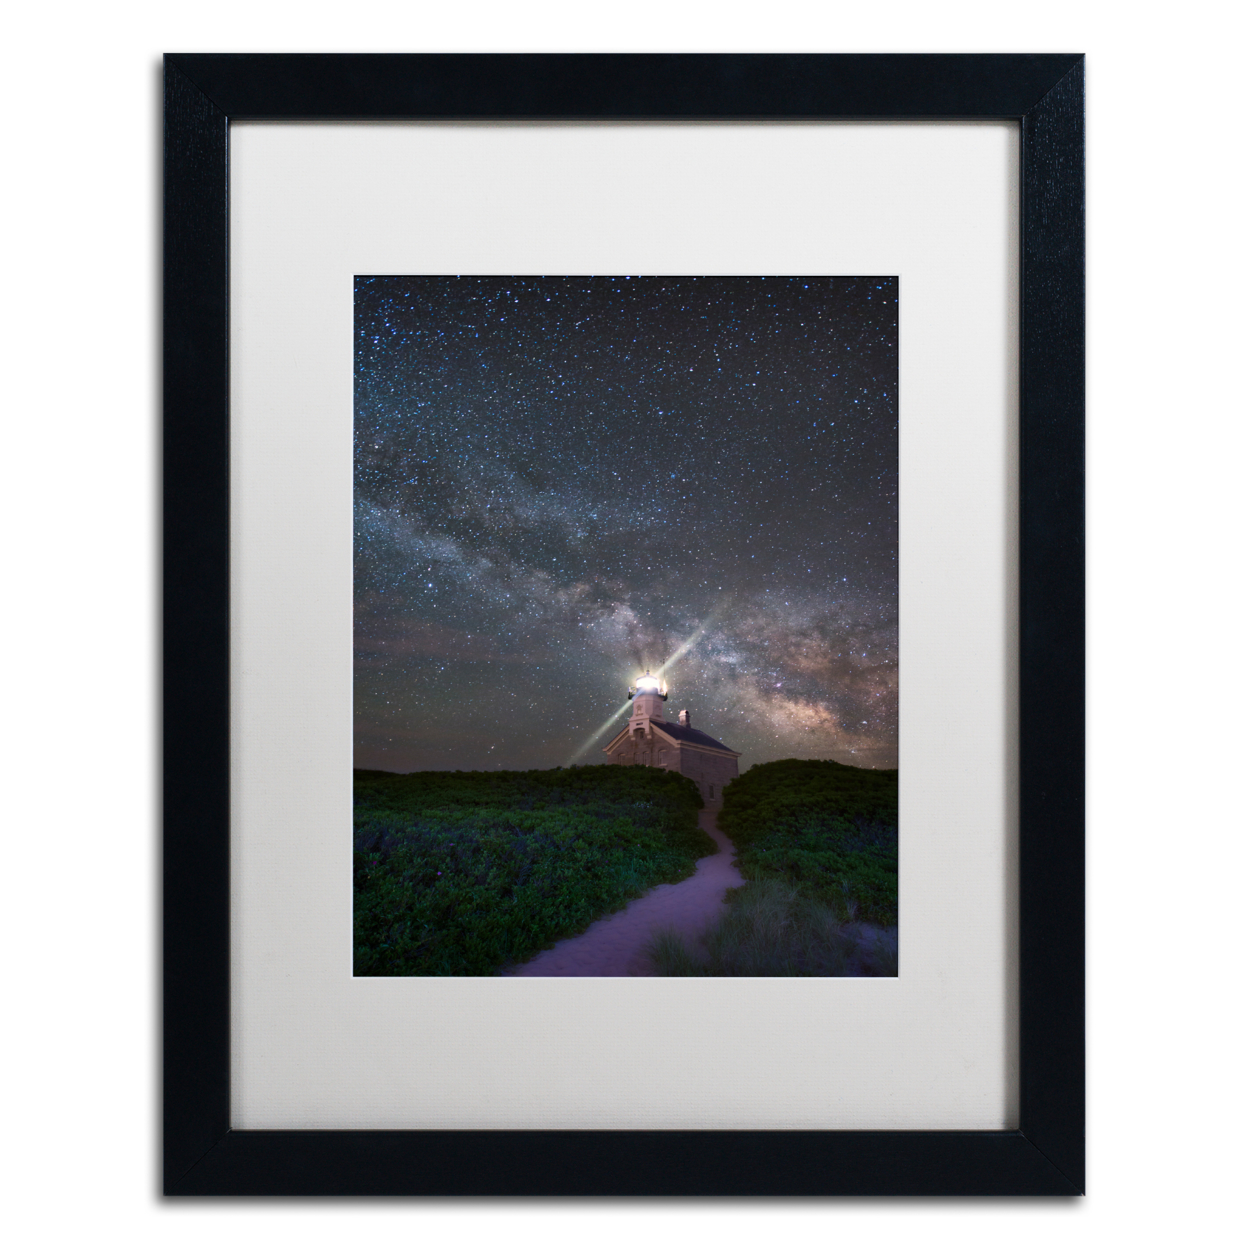 Michael Blanchette Photography 'Follow The Light' Black Wooden Framed Art 18 X 22 Inches